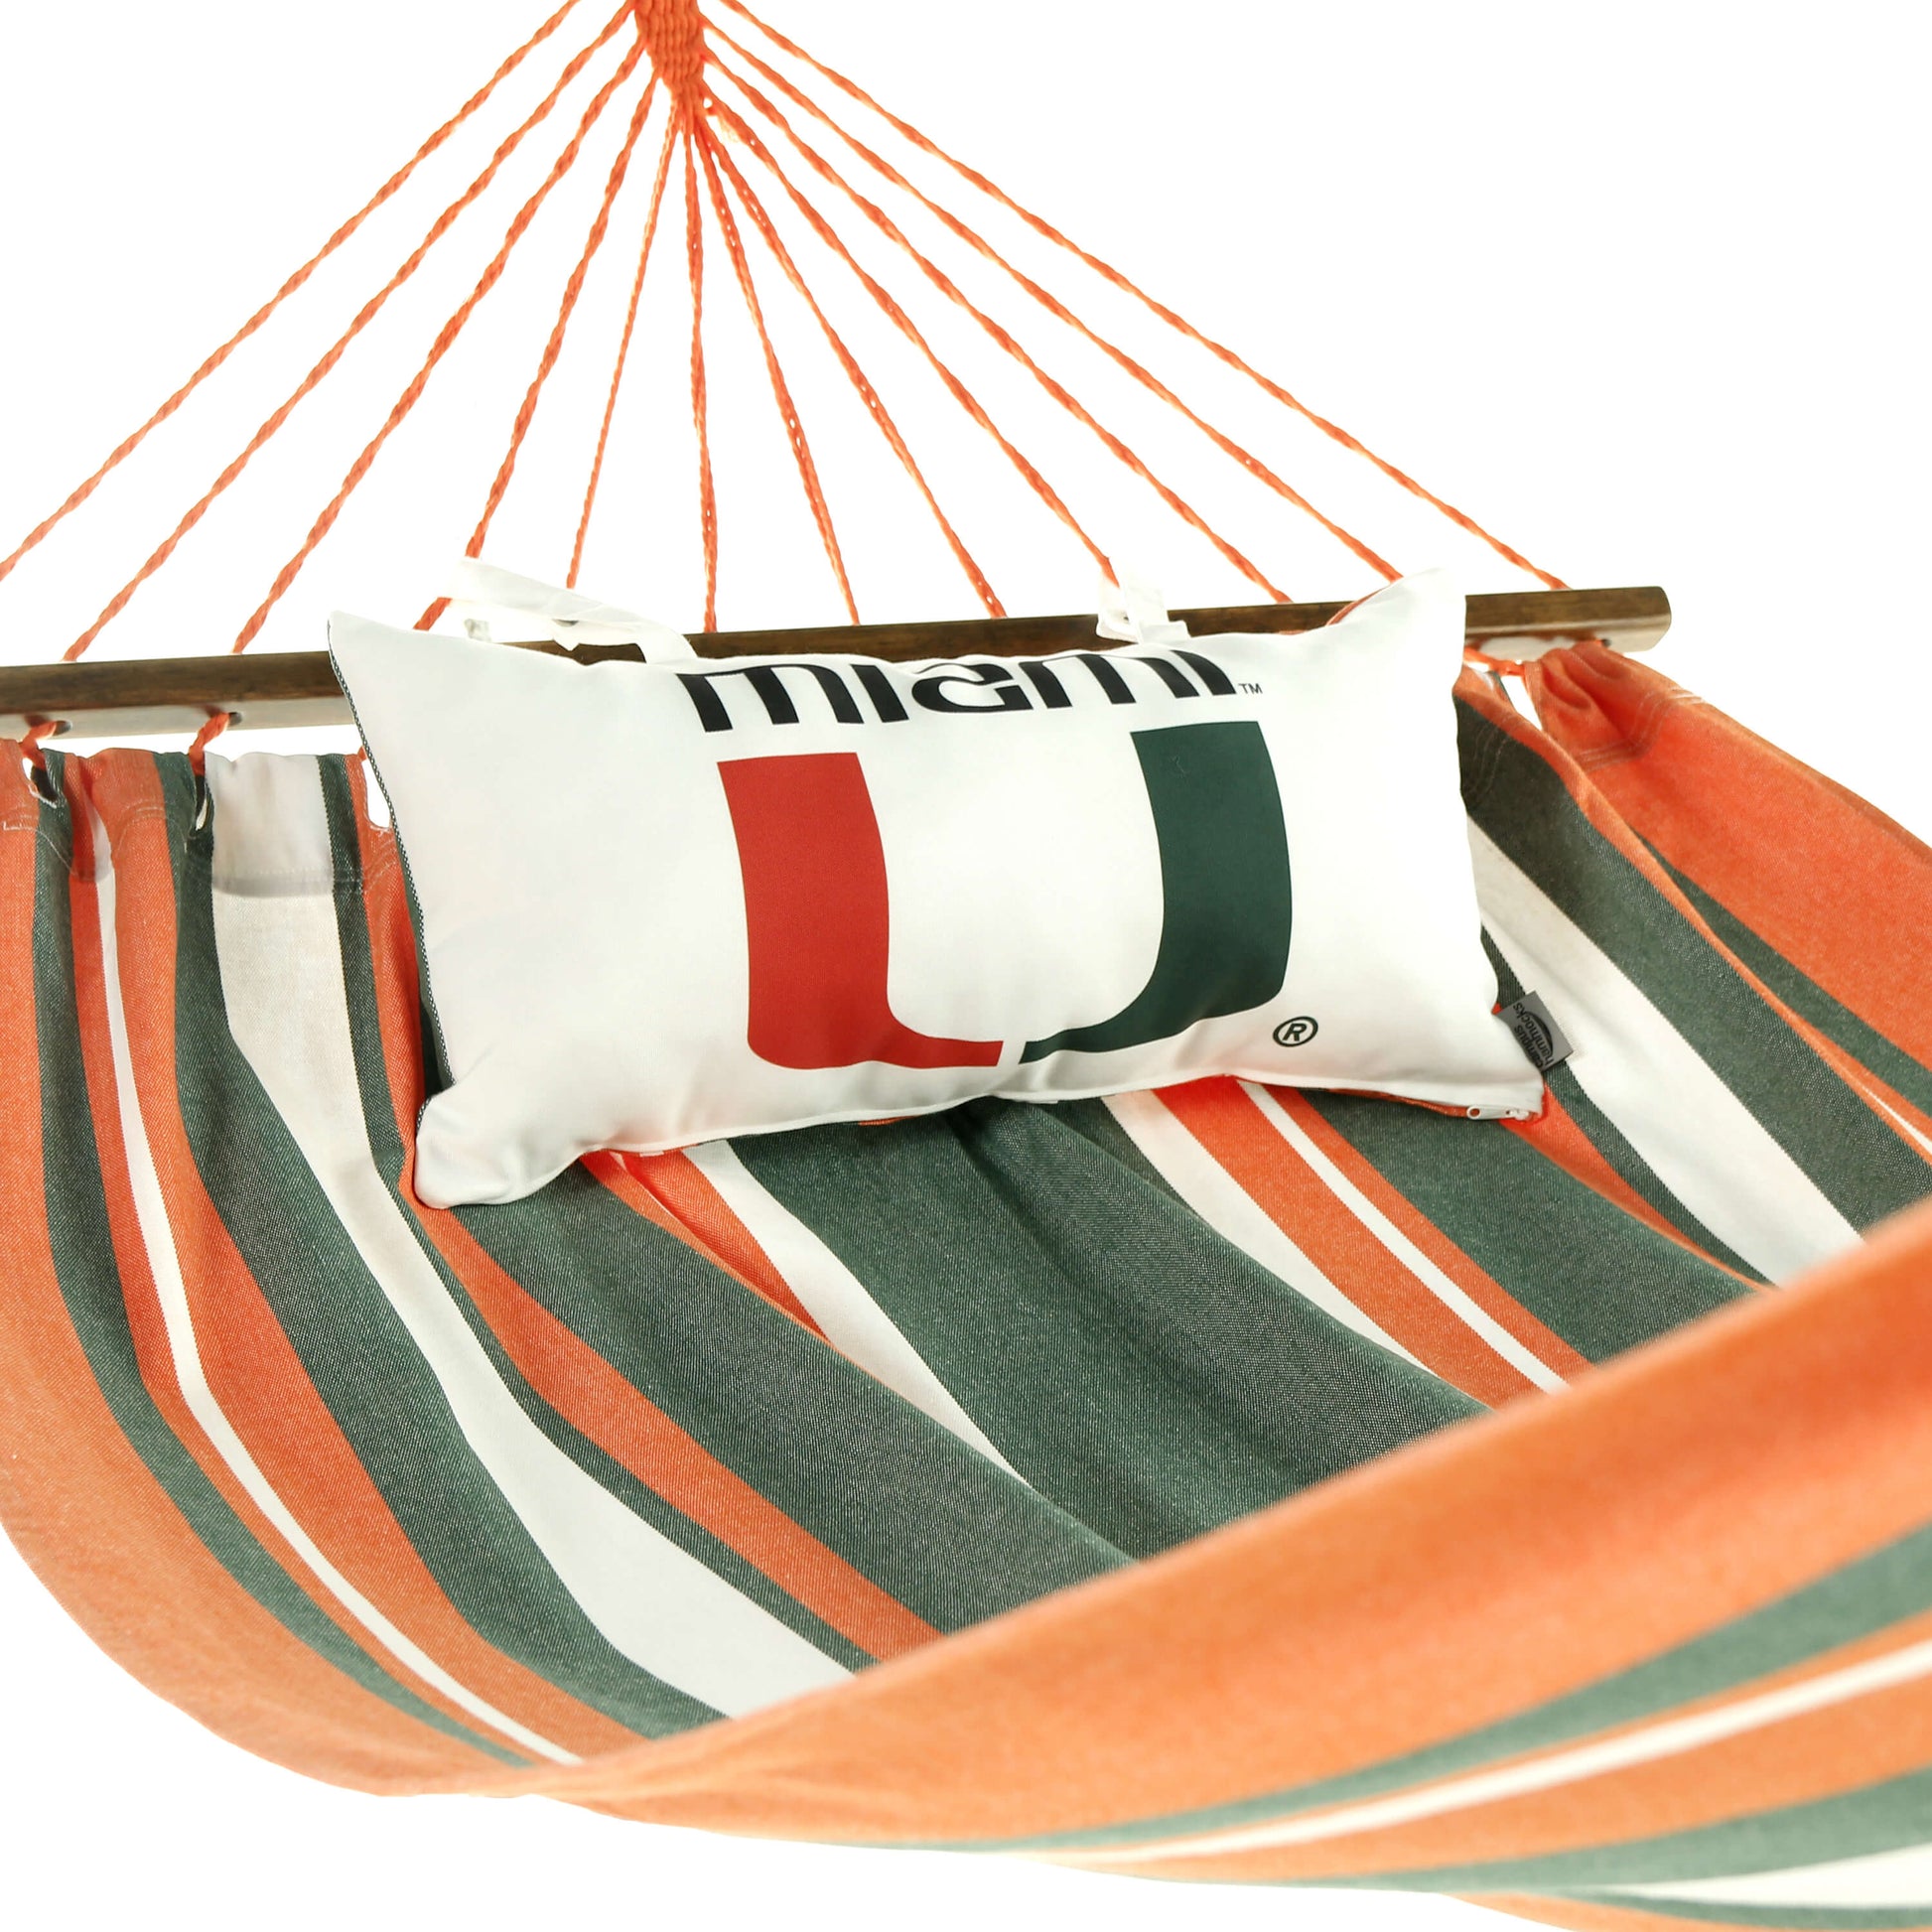 Miami Hurricanes Hammock with pillow